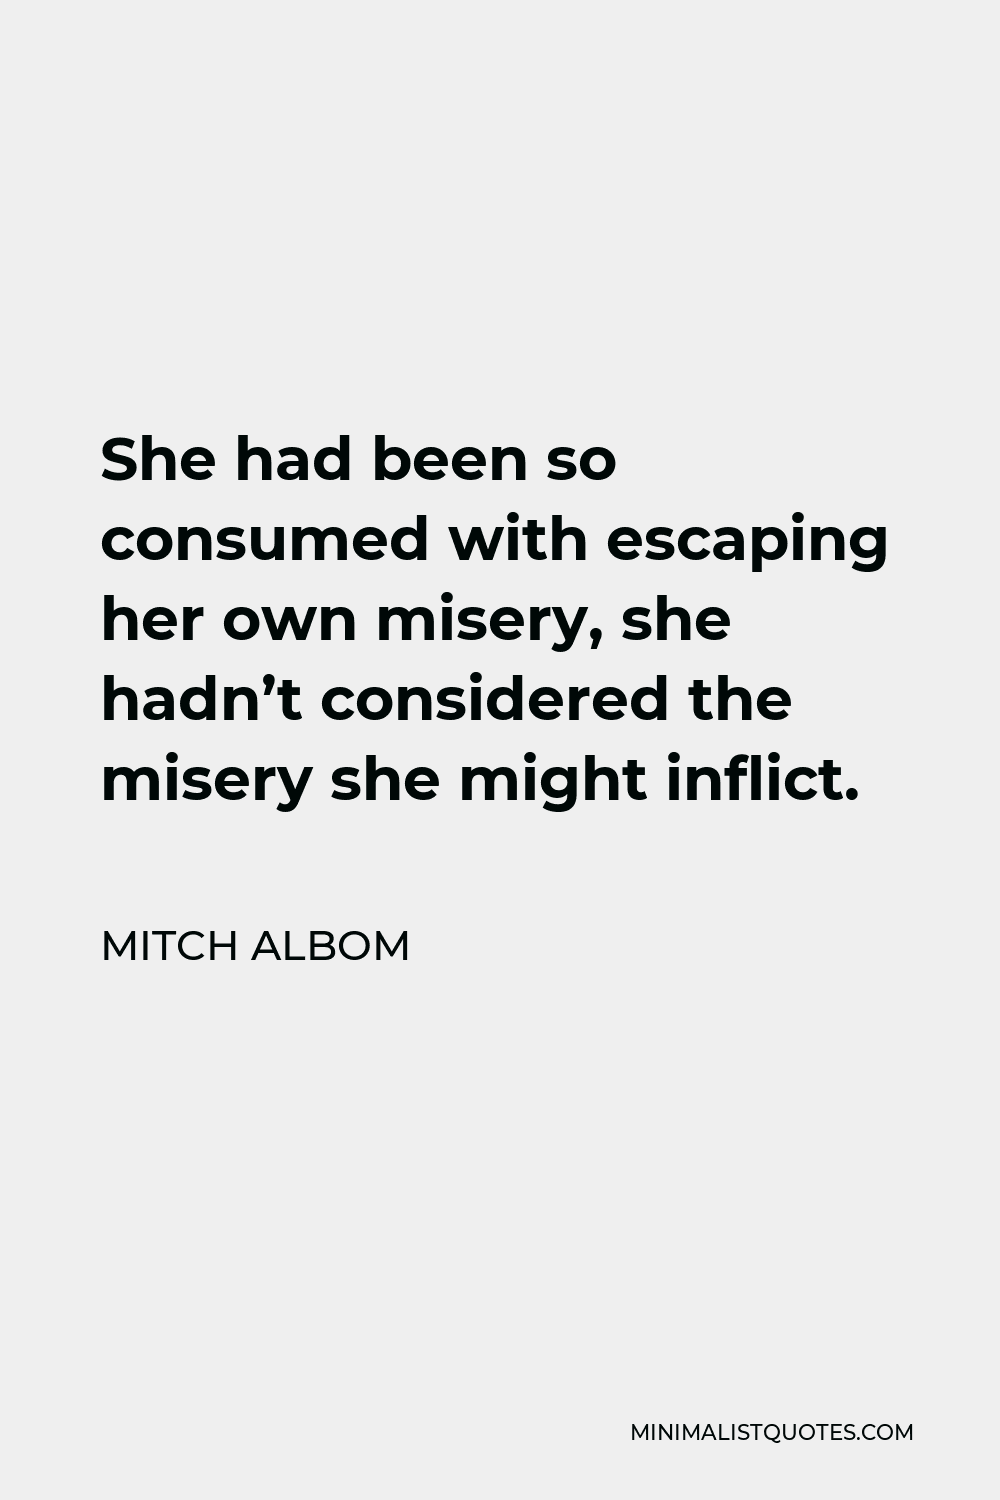 Mitch Albom Quote - She had been so consumed with escaping her own misery, she hadn’t considered the misery she might inflict.